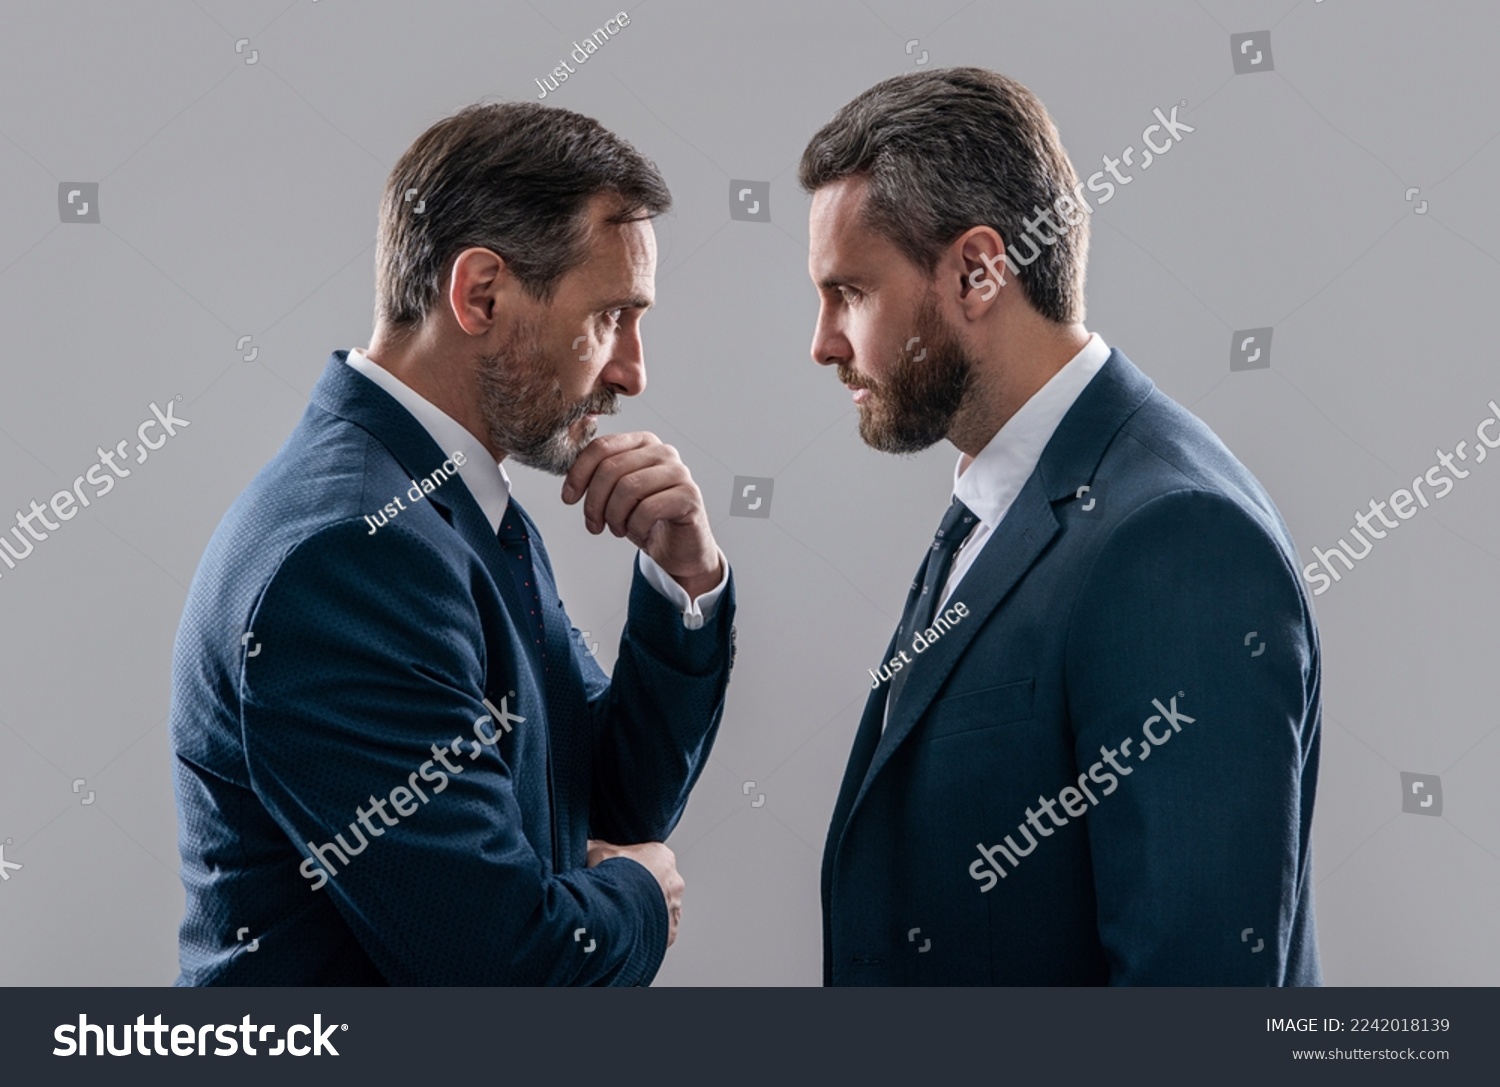 confrontation of two businessmen in suit. photo of businessmen has confrontation look #2242018139